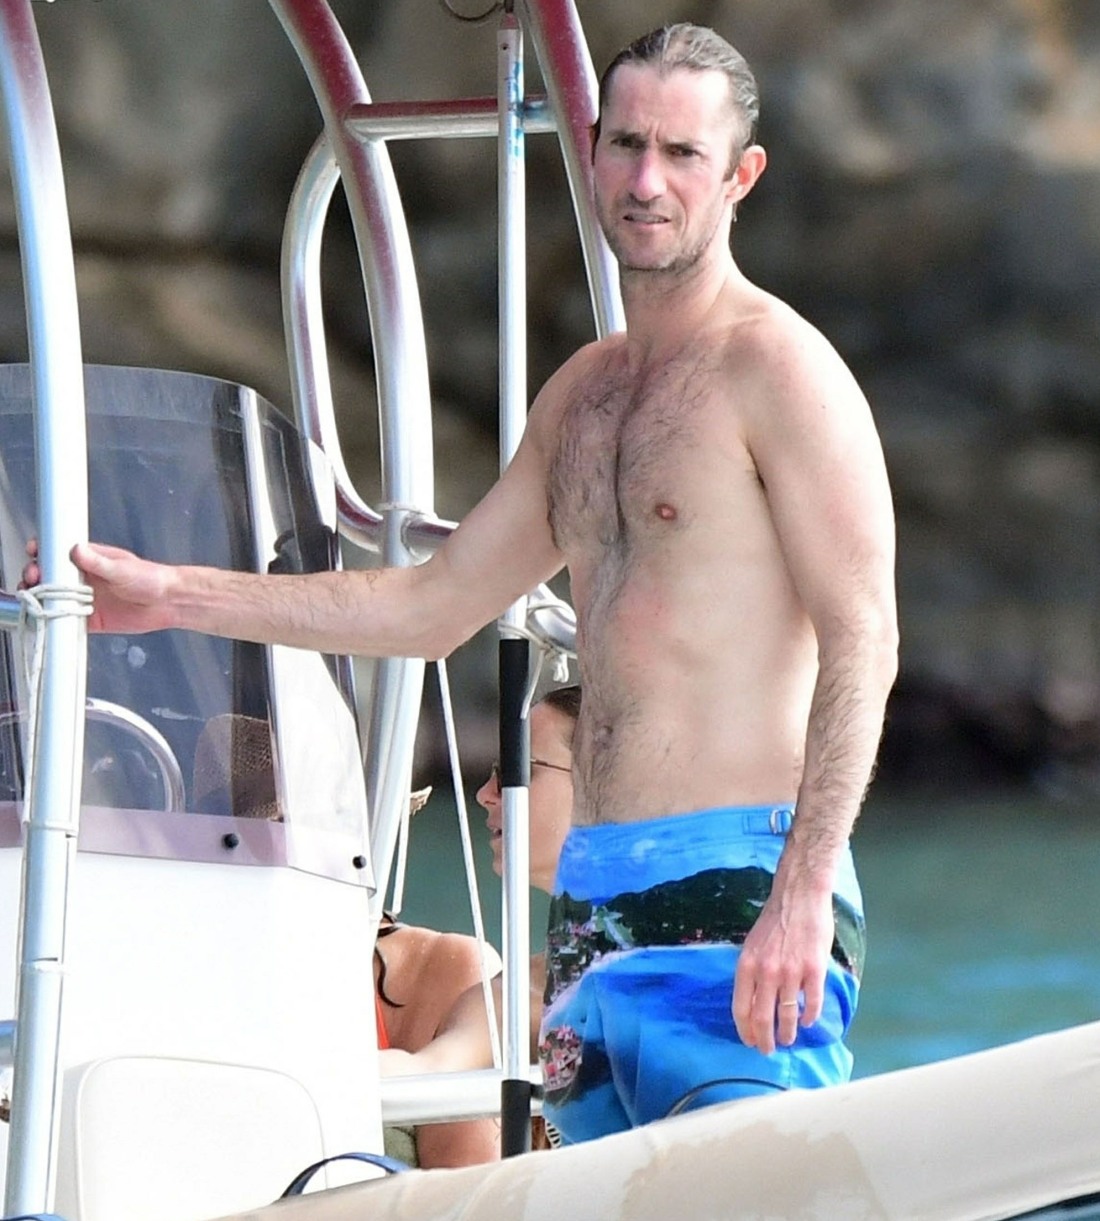 Pippa Middleton spends time with her family on holiday in St. Barts